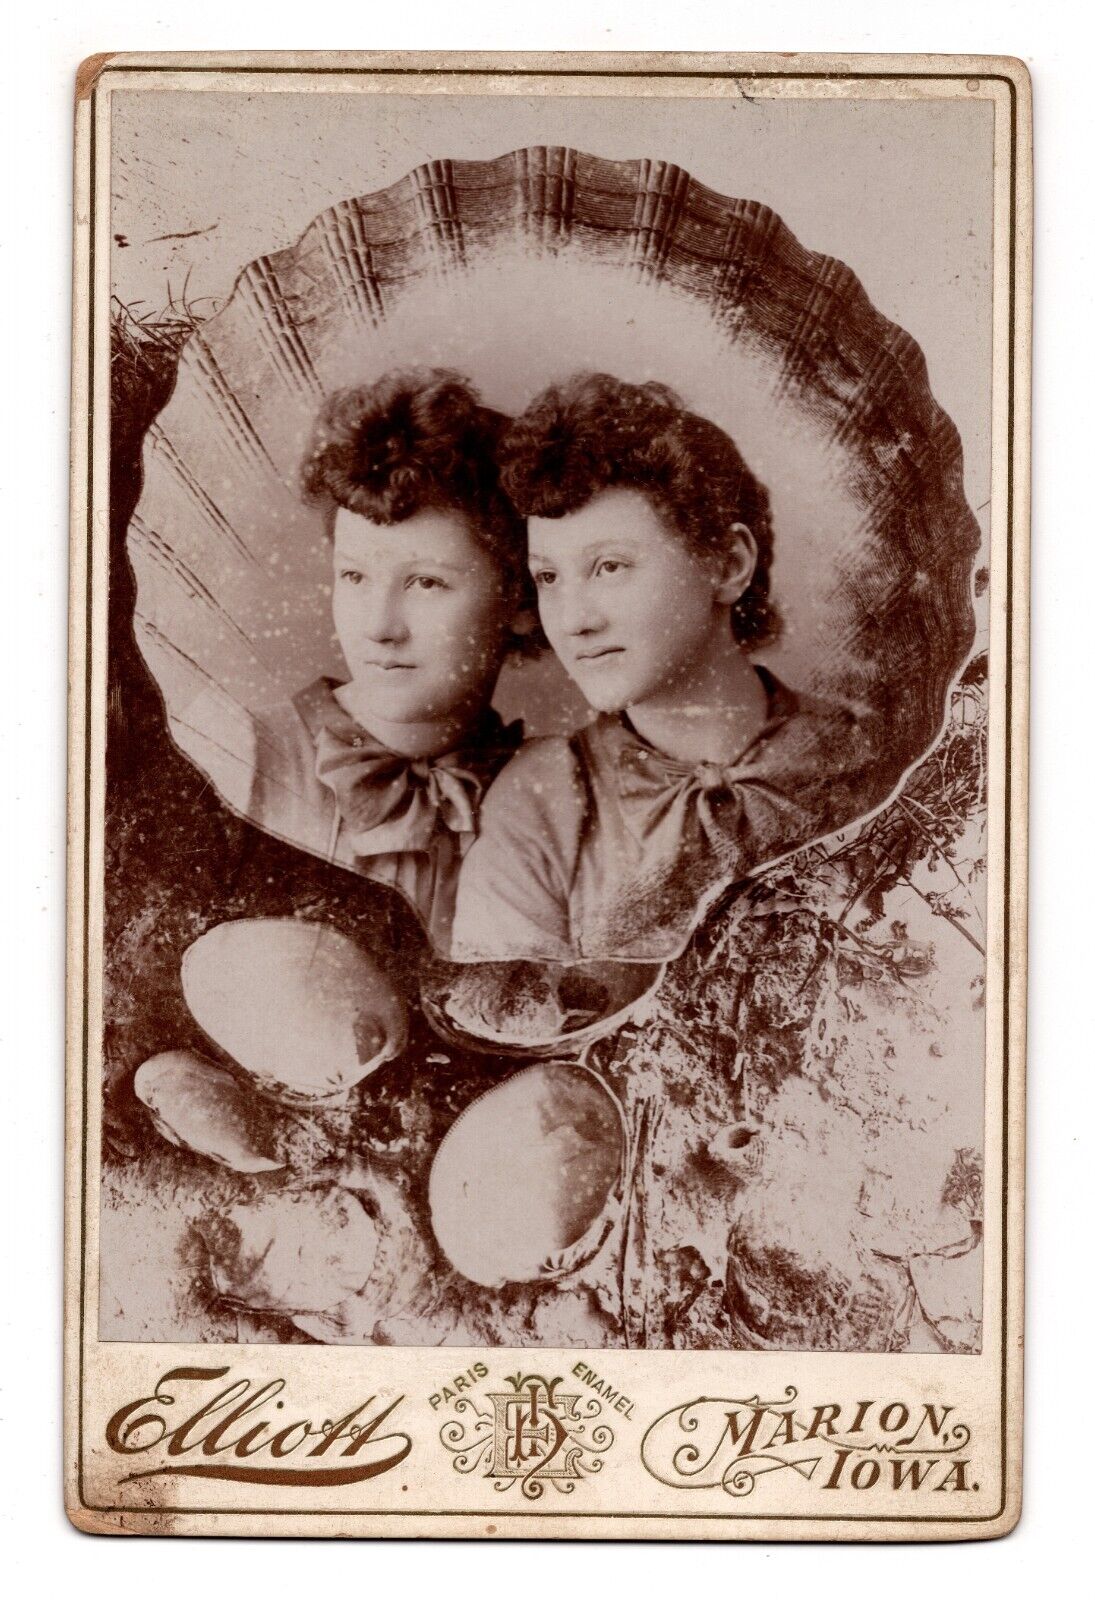 C. 1890s CABINET CARD ELLIOTT GORGEOUS YOUNG LADIES CLAMSHELL DESIGN MARION IOWA